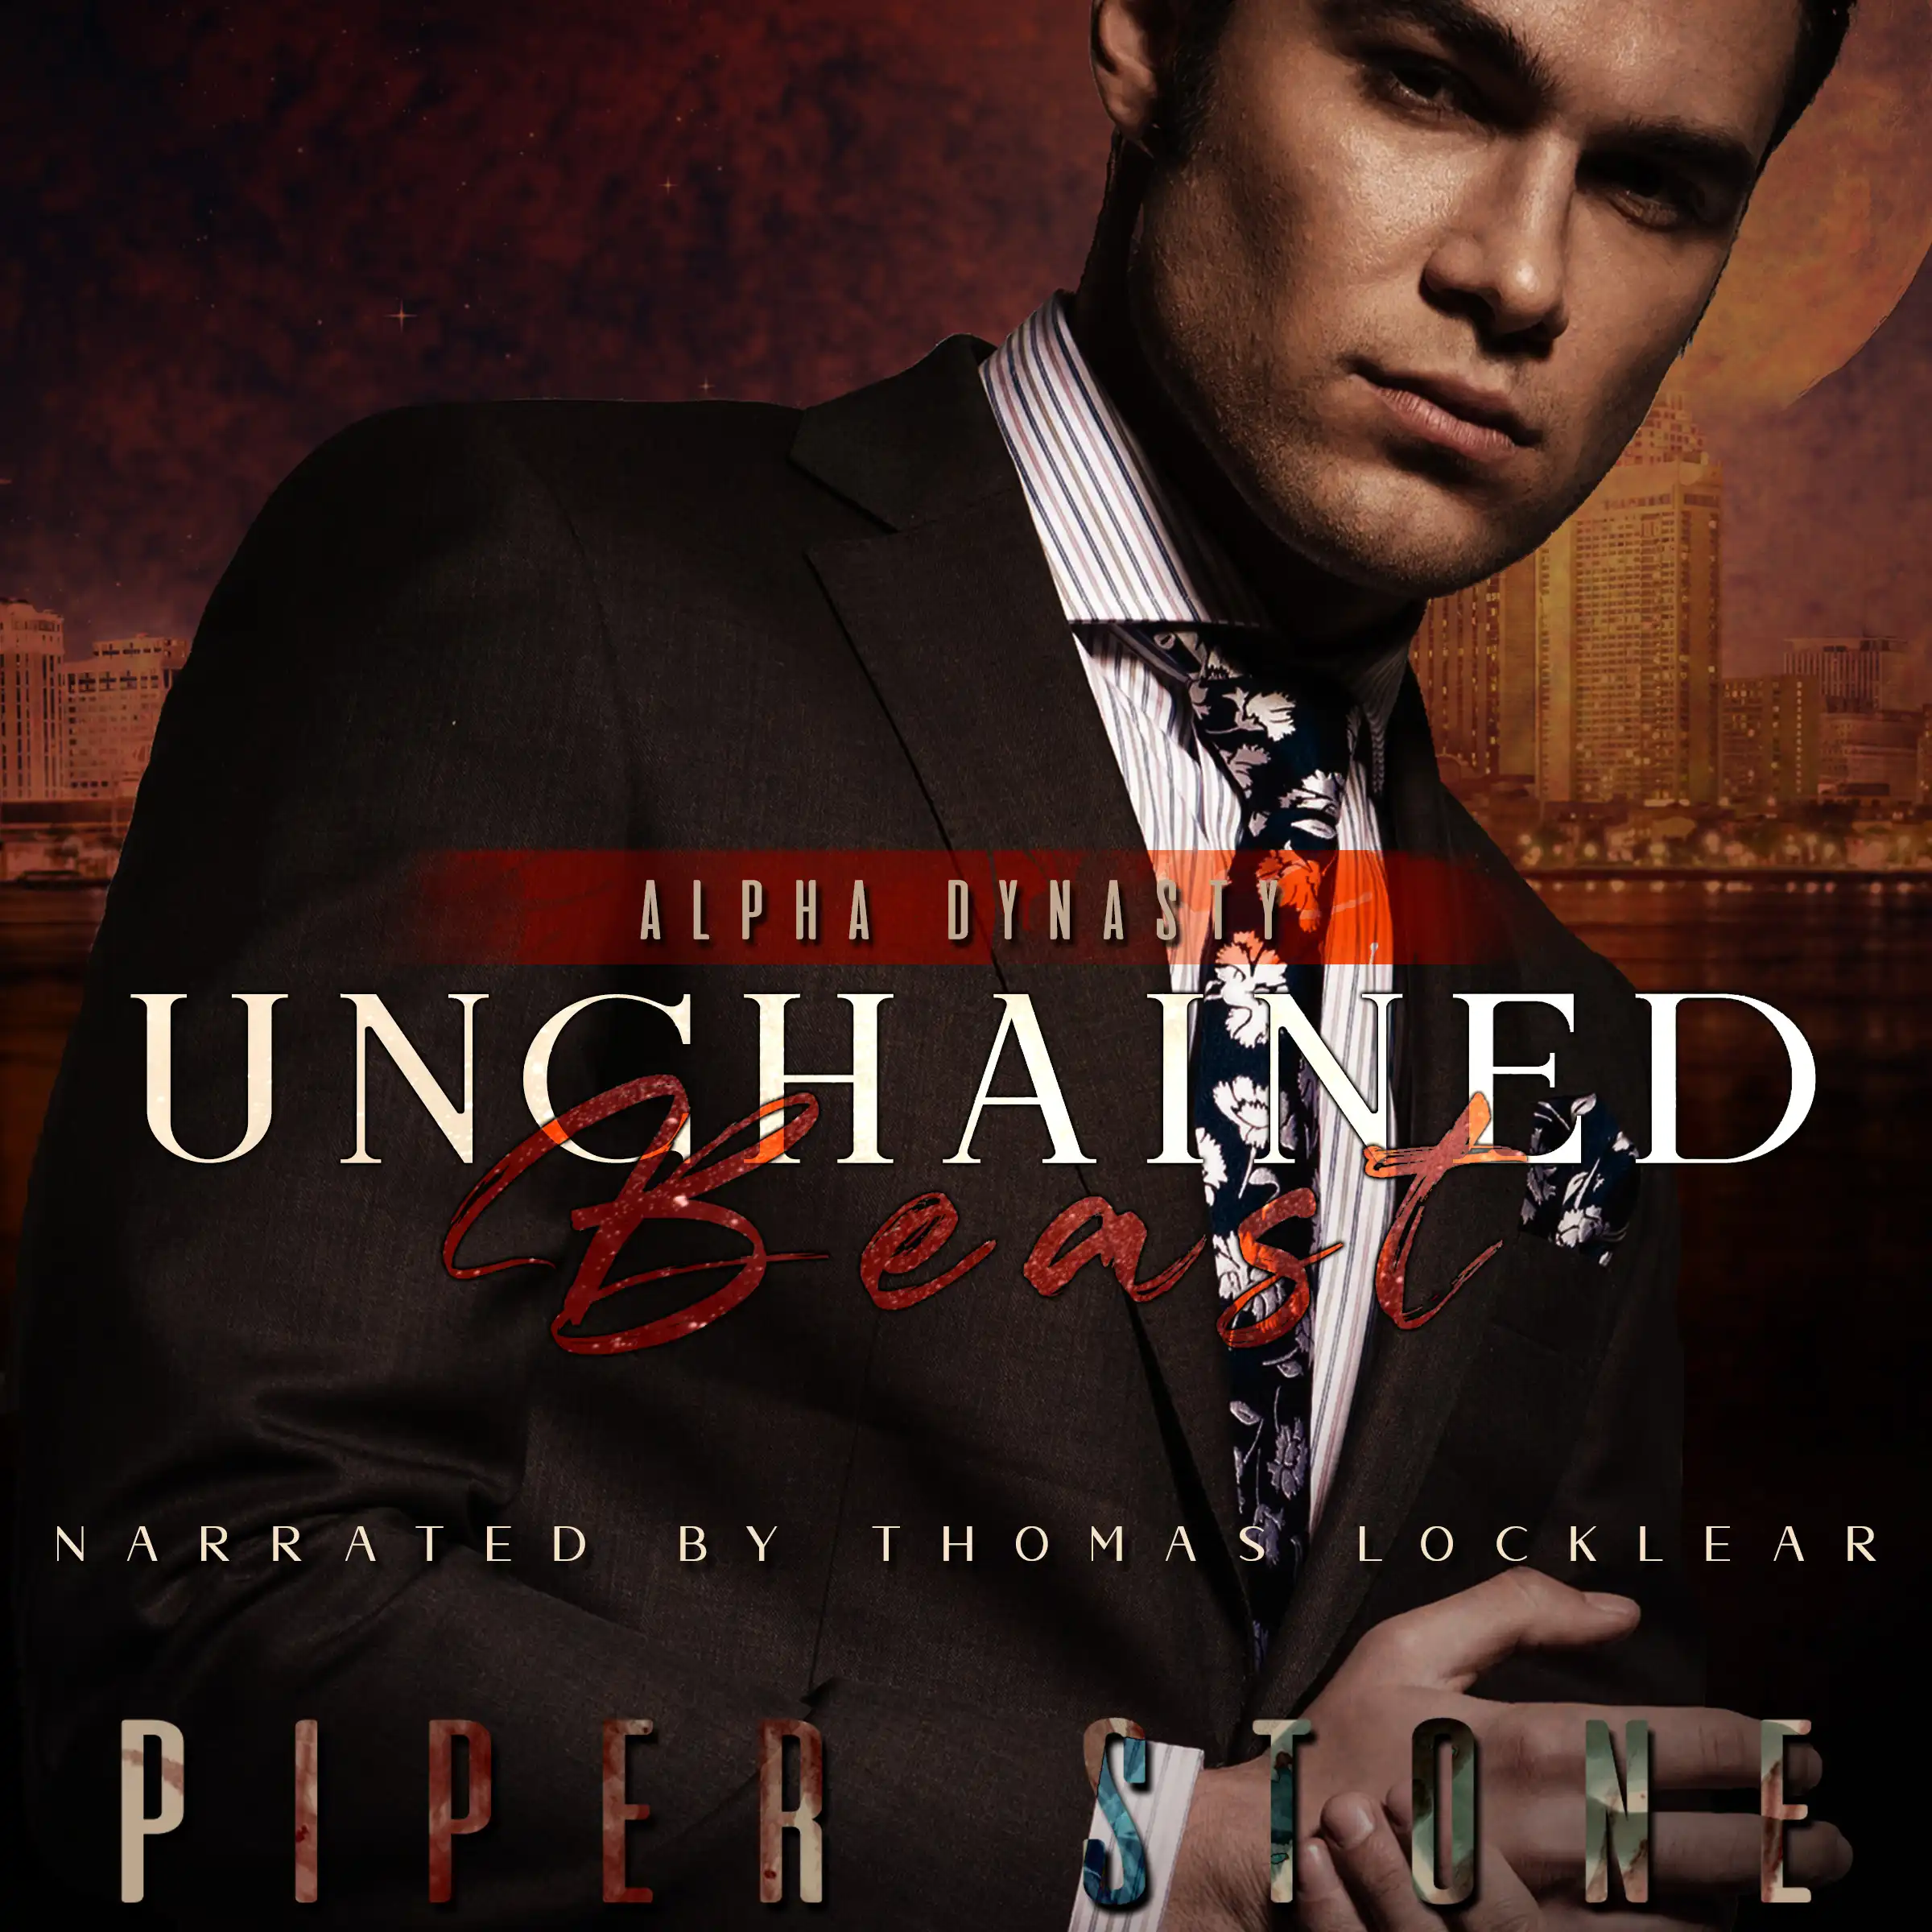 unchained-beast-audible